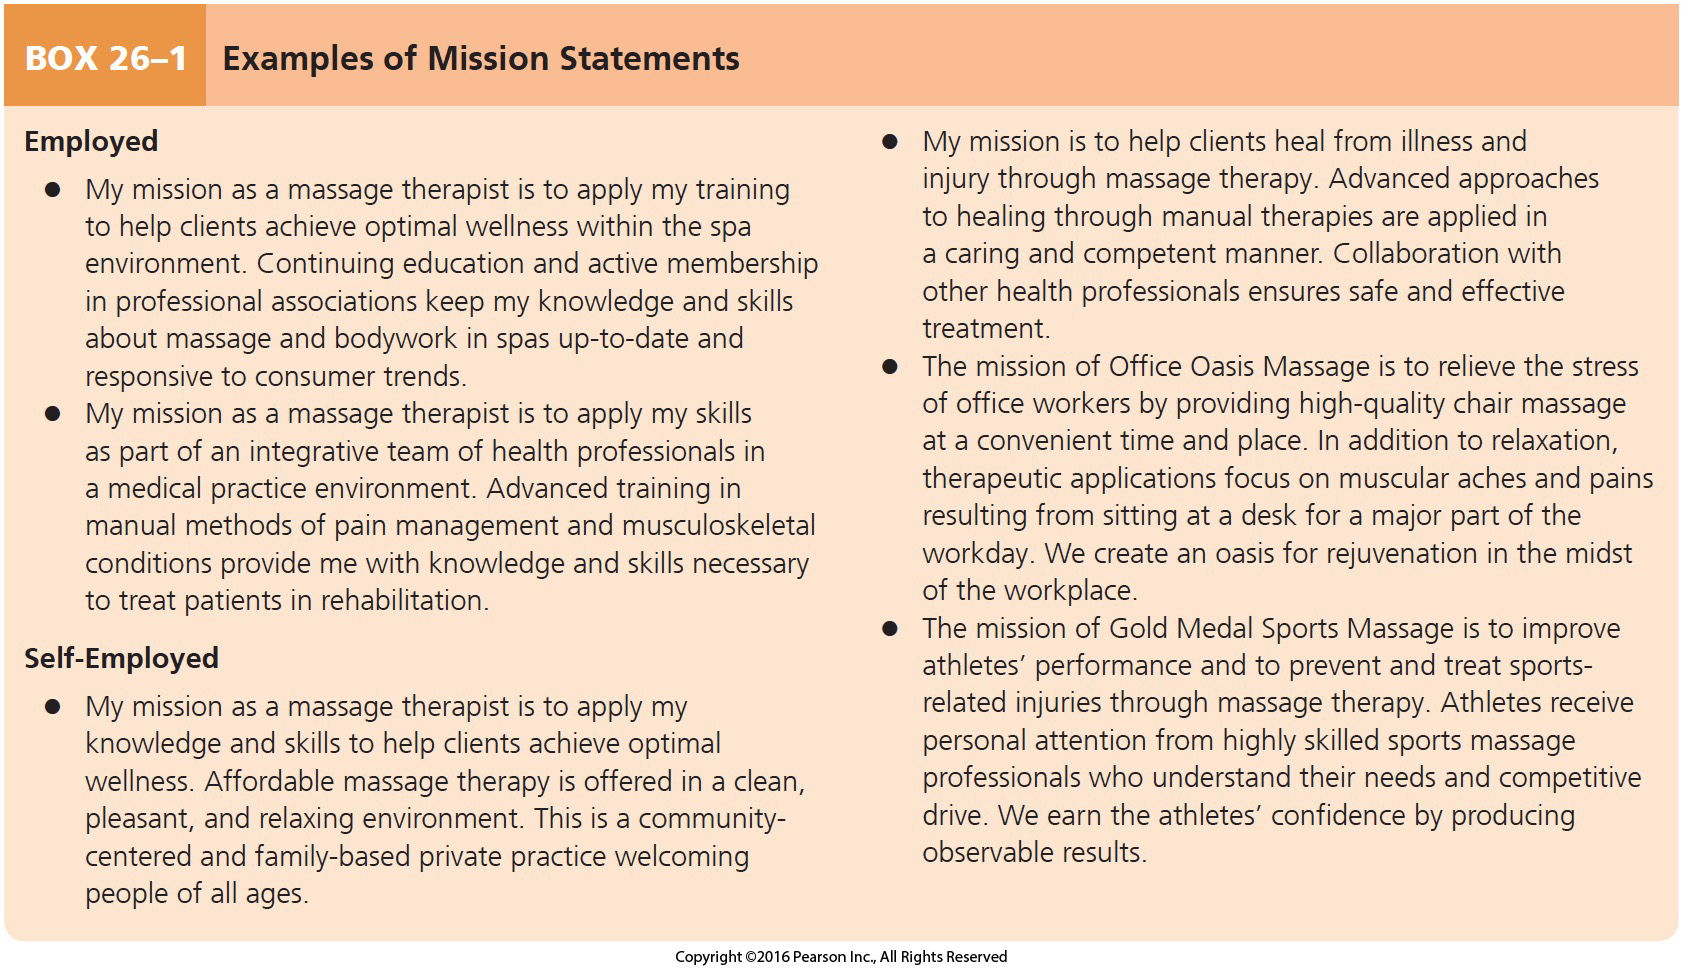 Examples of Mission Statements